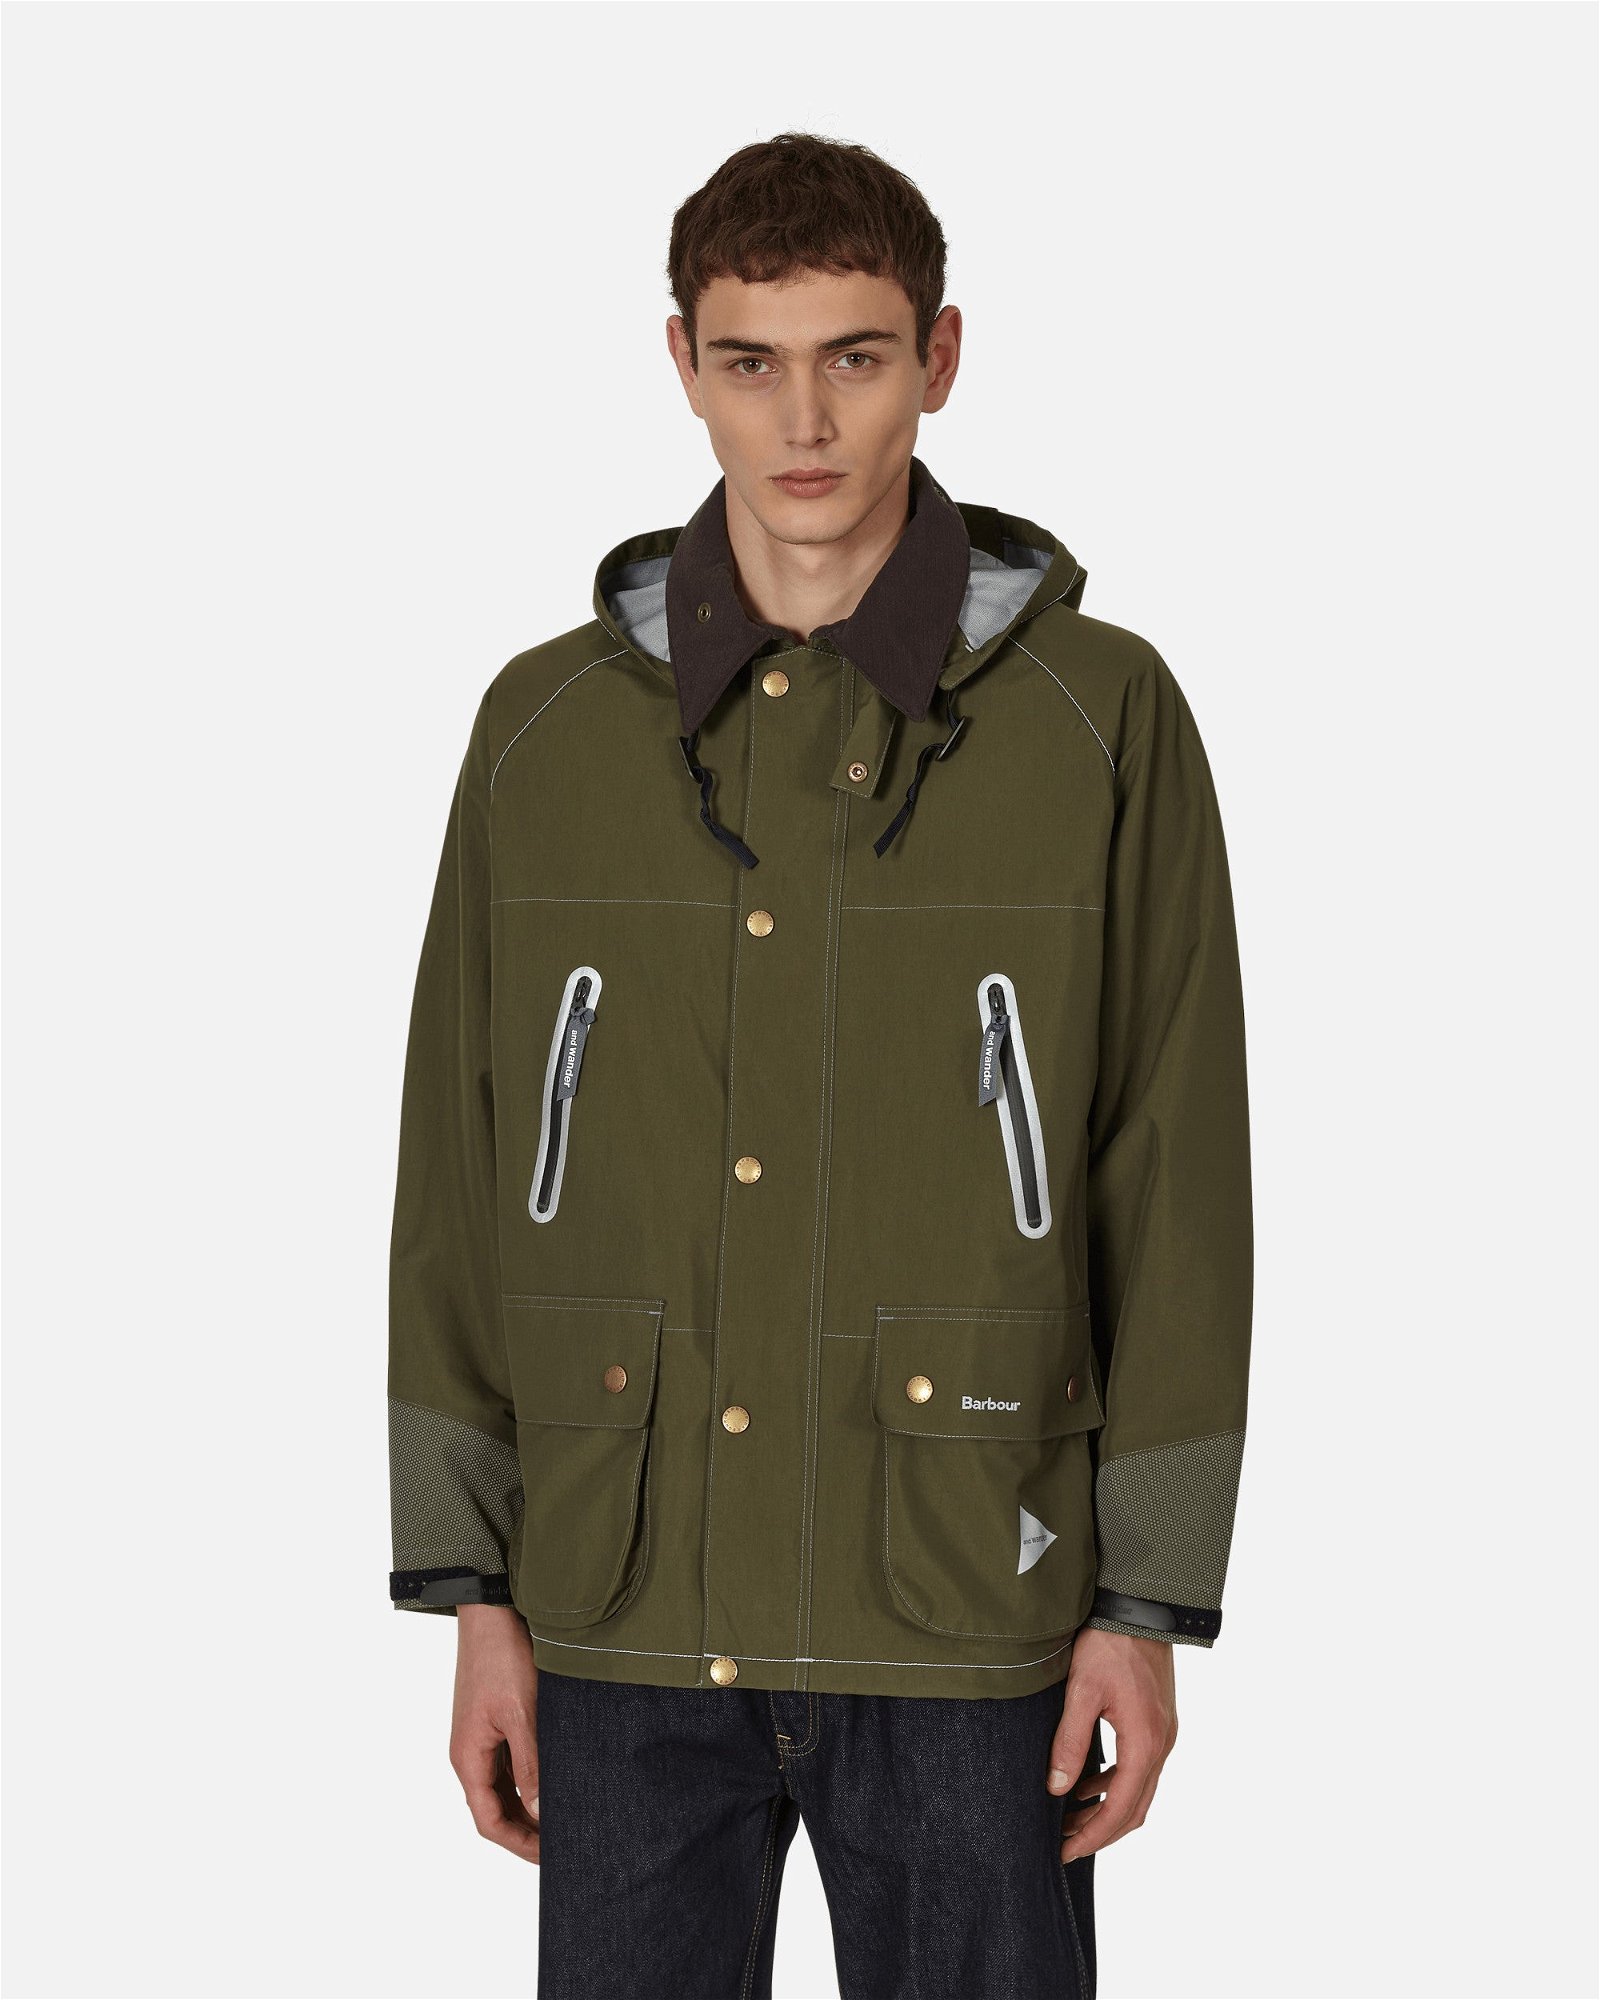 barbour and wander CORDURA e vent Jacket 人気 - ジャケット・アウター